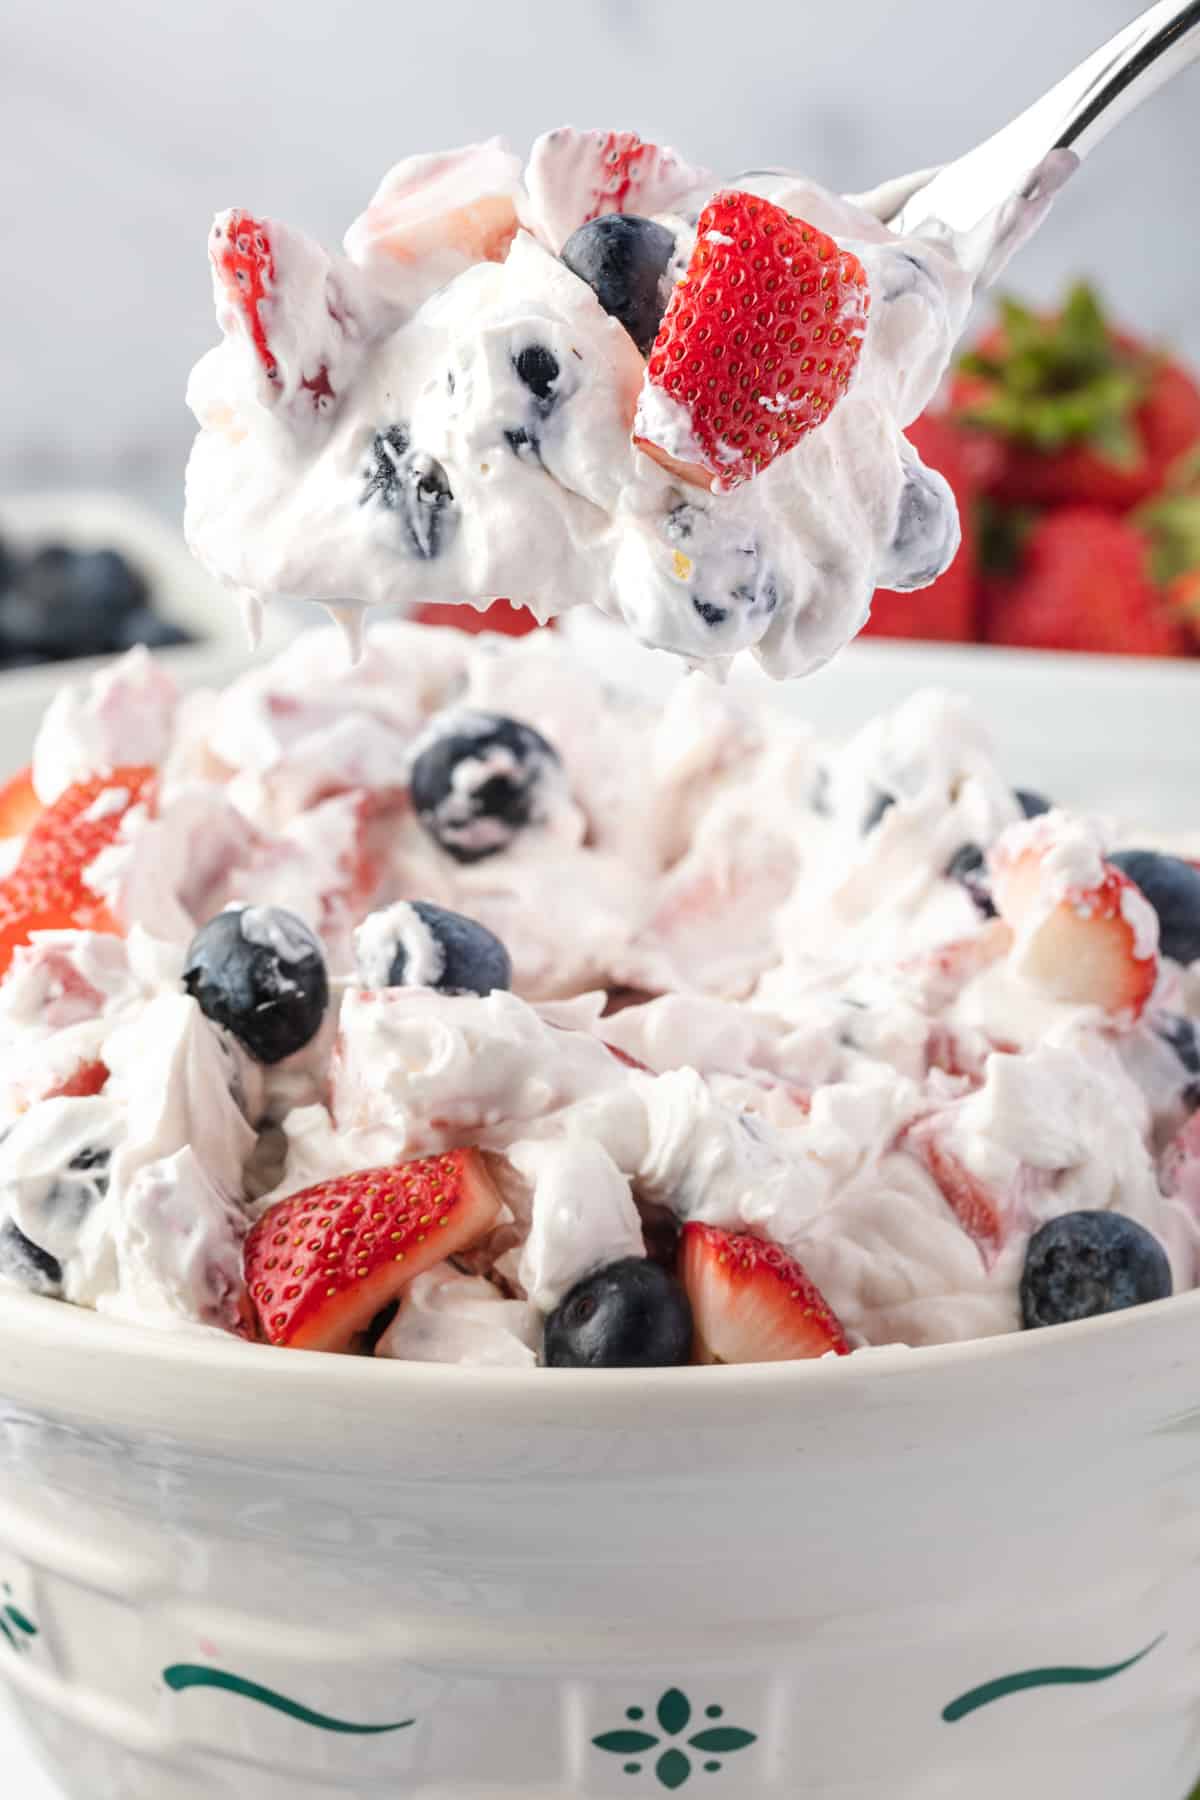 cheesecake fruit salad filled with blueberries and strawberries